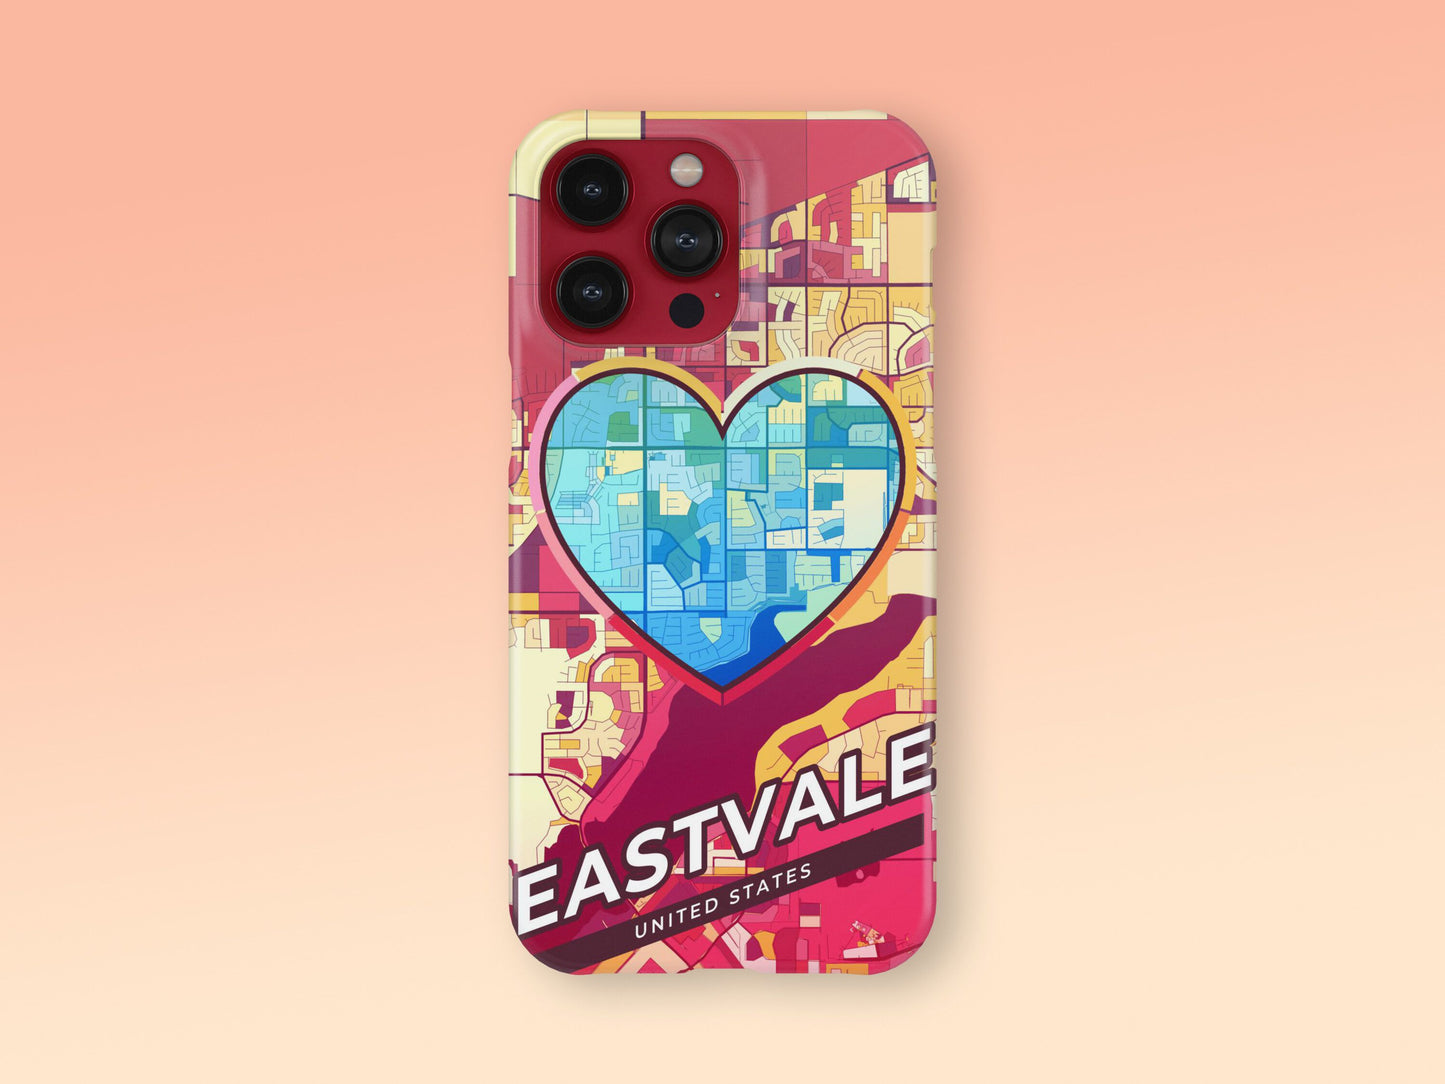 Eastvale California slim phone case with colorful icon. Birthday, wedding or housewarming gift. Couple match cases. 2